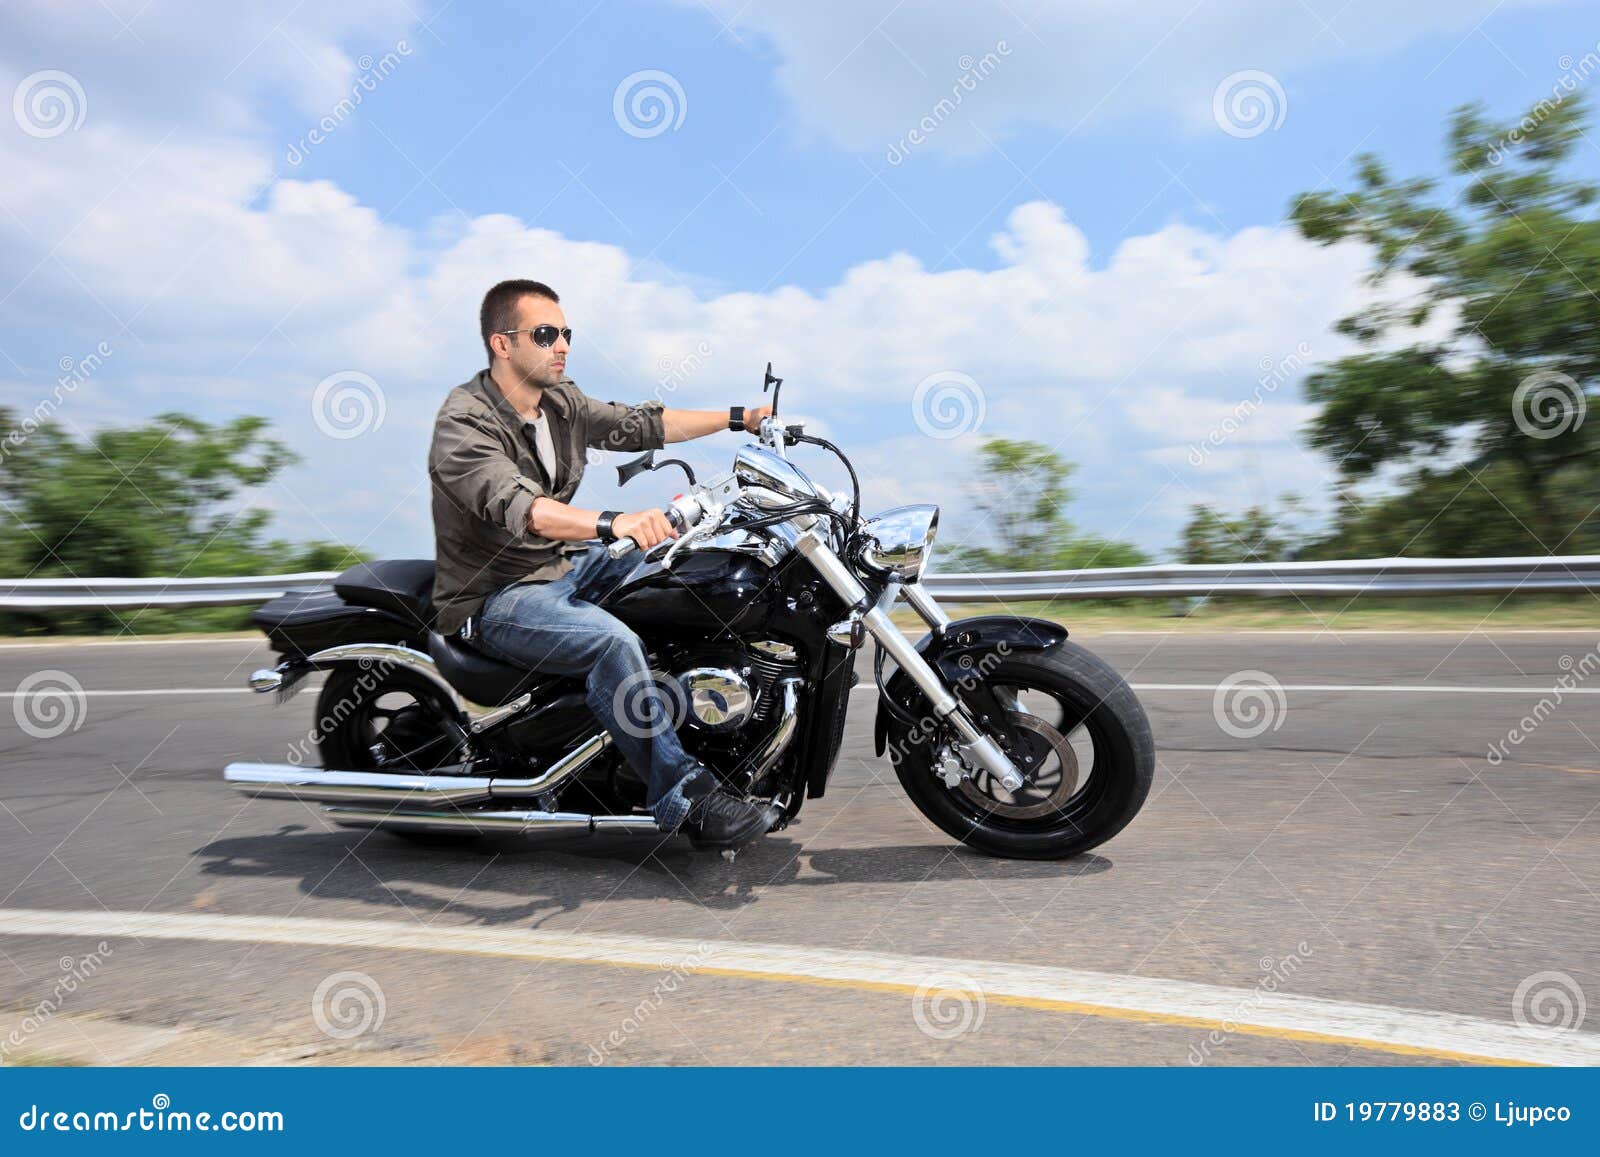 Young Man Riding A Motorcycle On An Open Road Stock Image ...